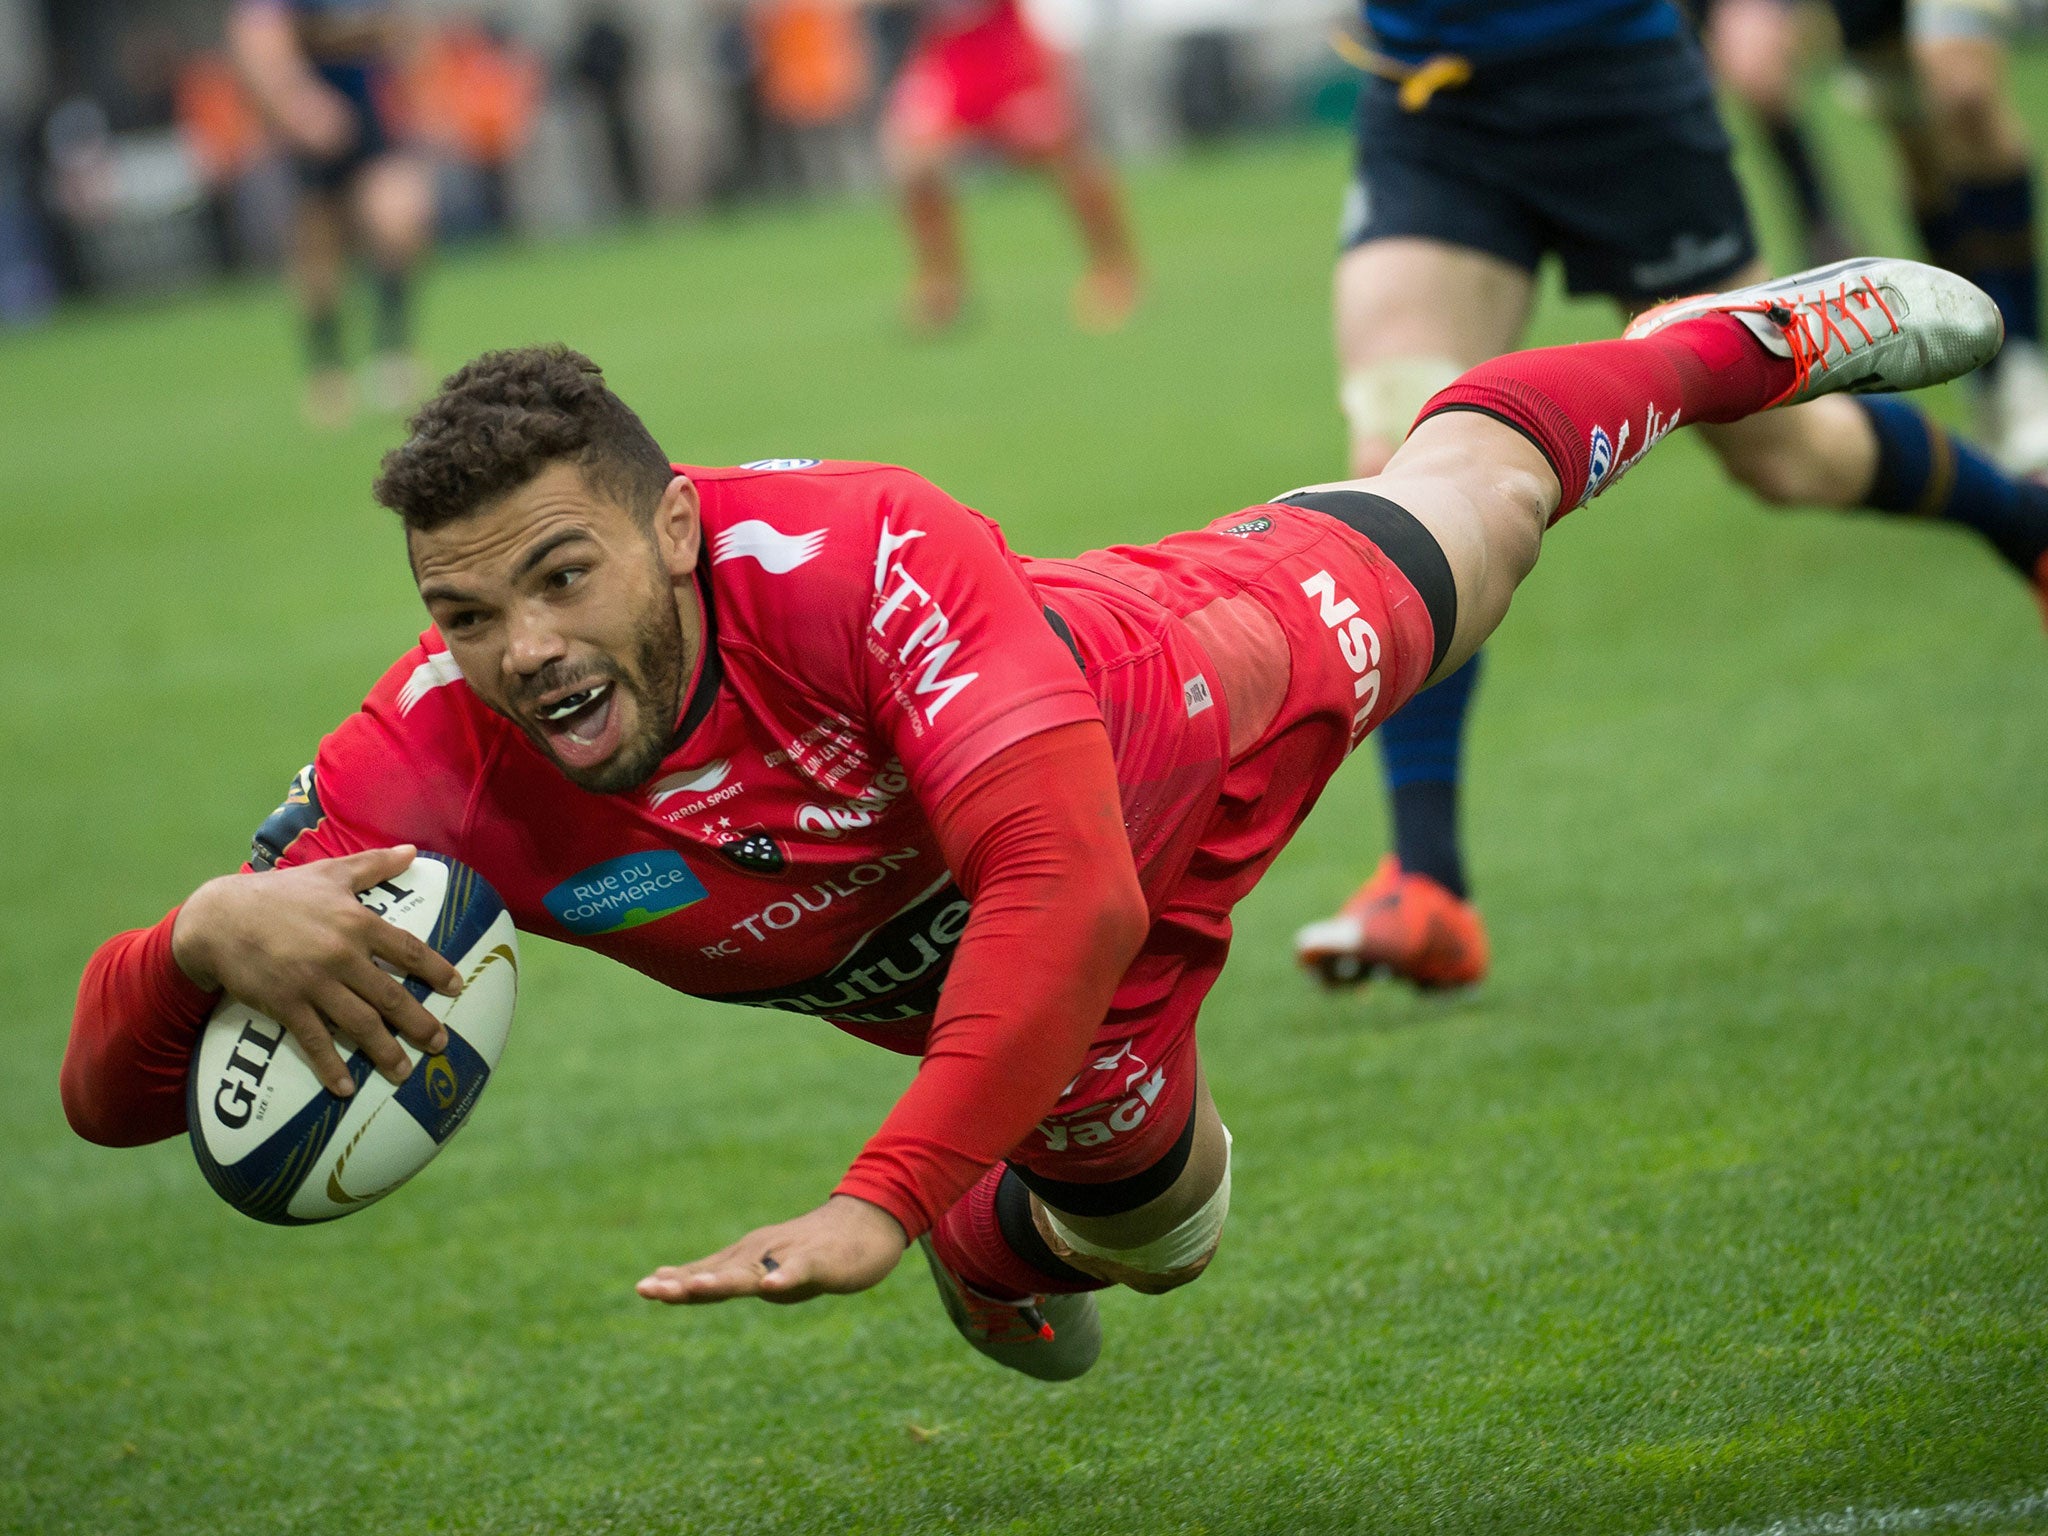 Bryan Habana scores the match winning try in the European Champions Cup semi-final victory over Leinster